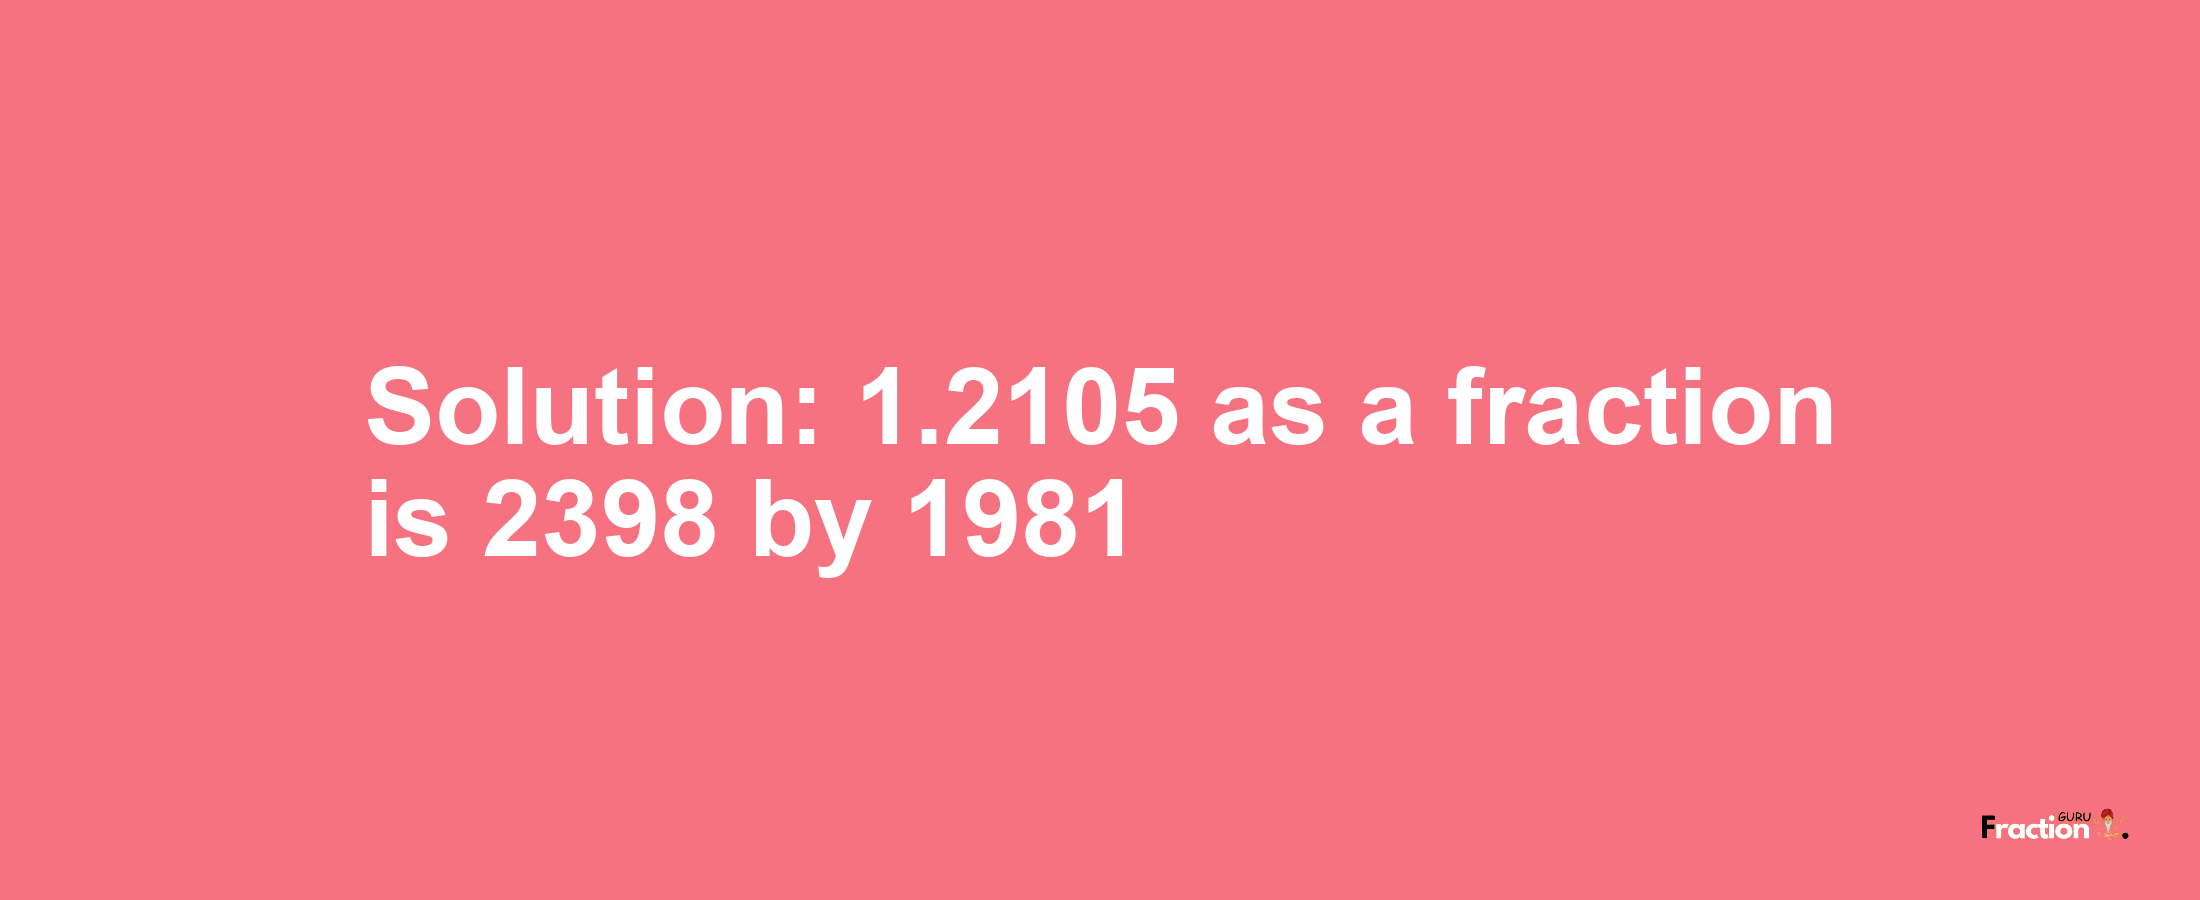 Solution:1.2105 as a fraction is 2398/1981